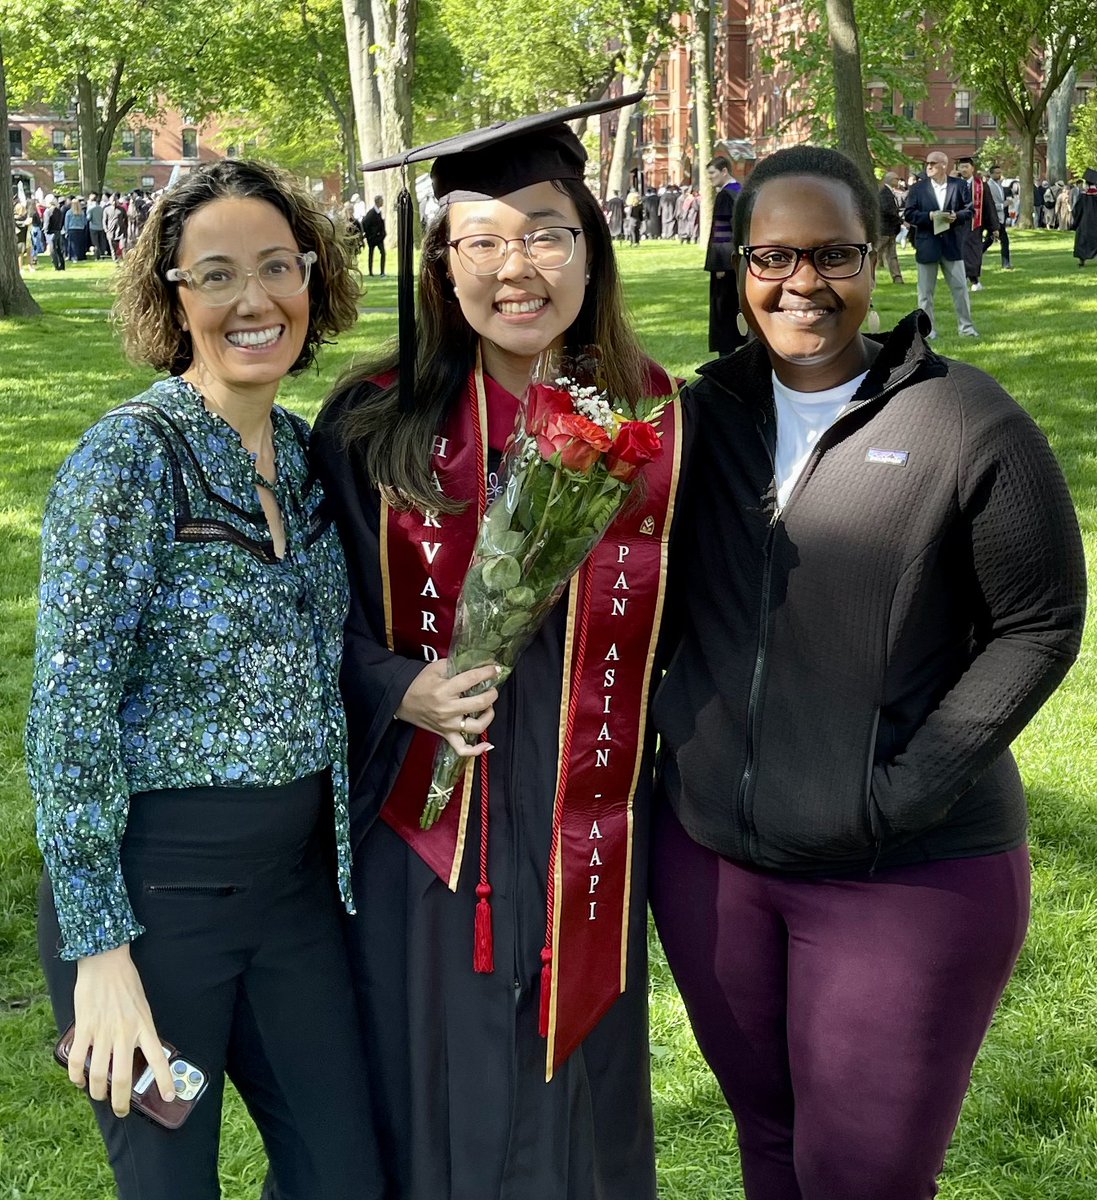 Congrats to (now former 🥹) undergrad Lauren! It's been an honor working with you this past year @sabeti_lab. Wishing you the best as you graduate from #Harvard and become a Rhodes Scholar at #Oxford. Your future is boundless!